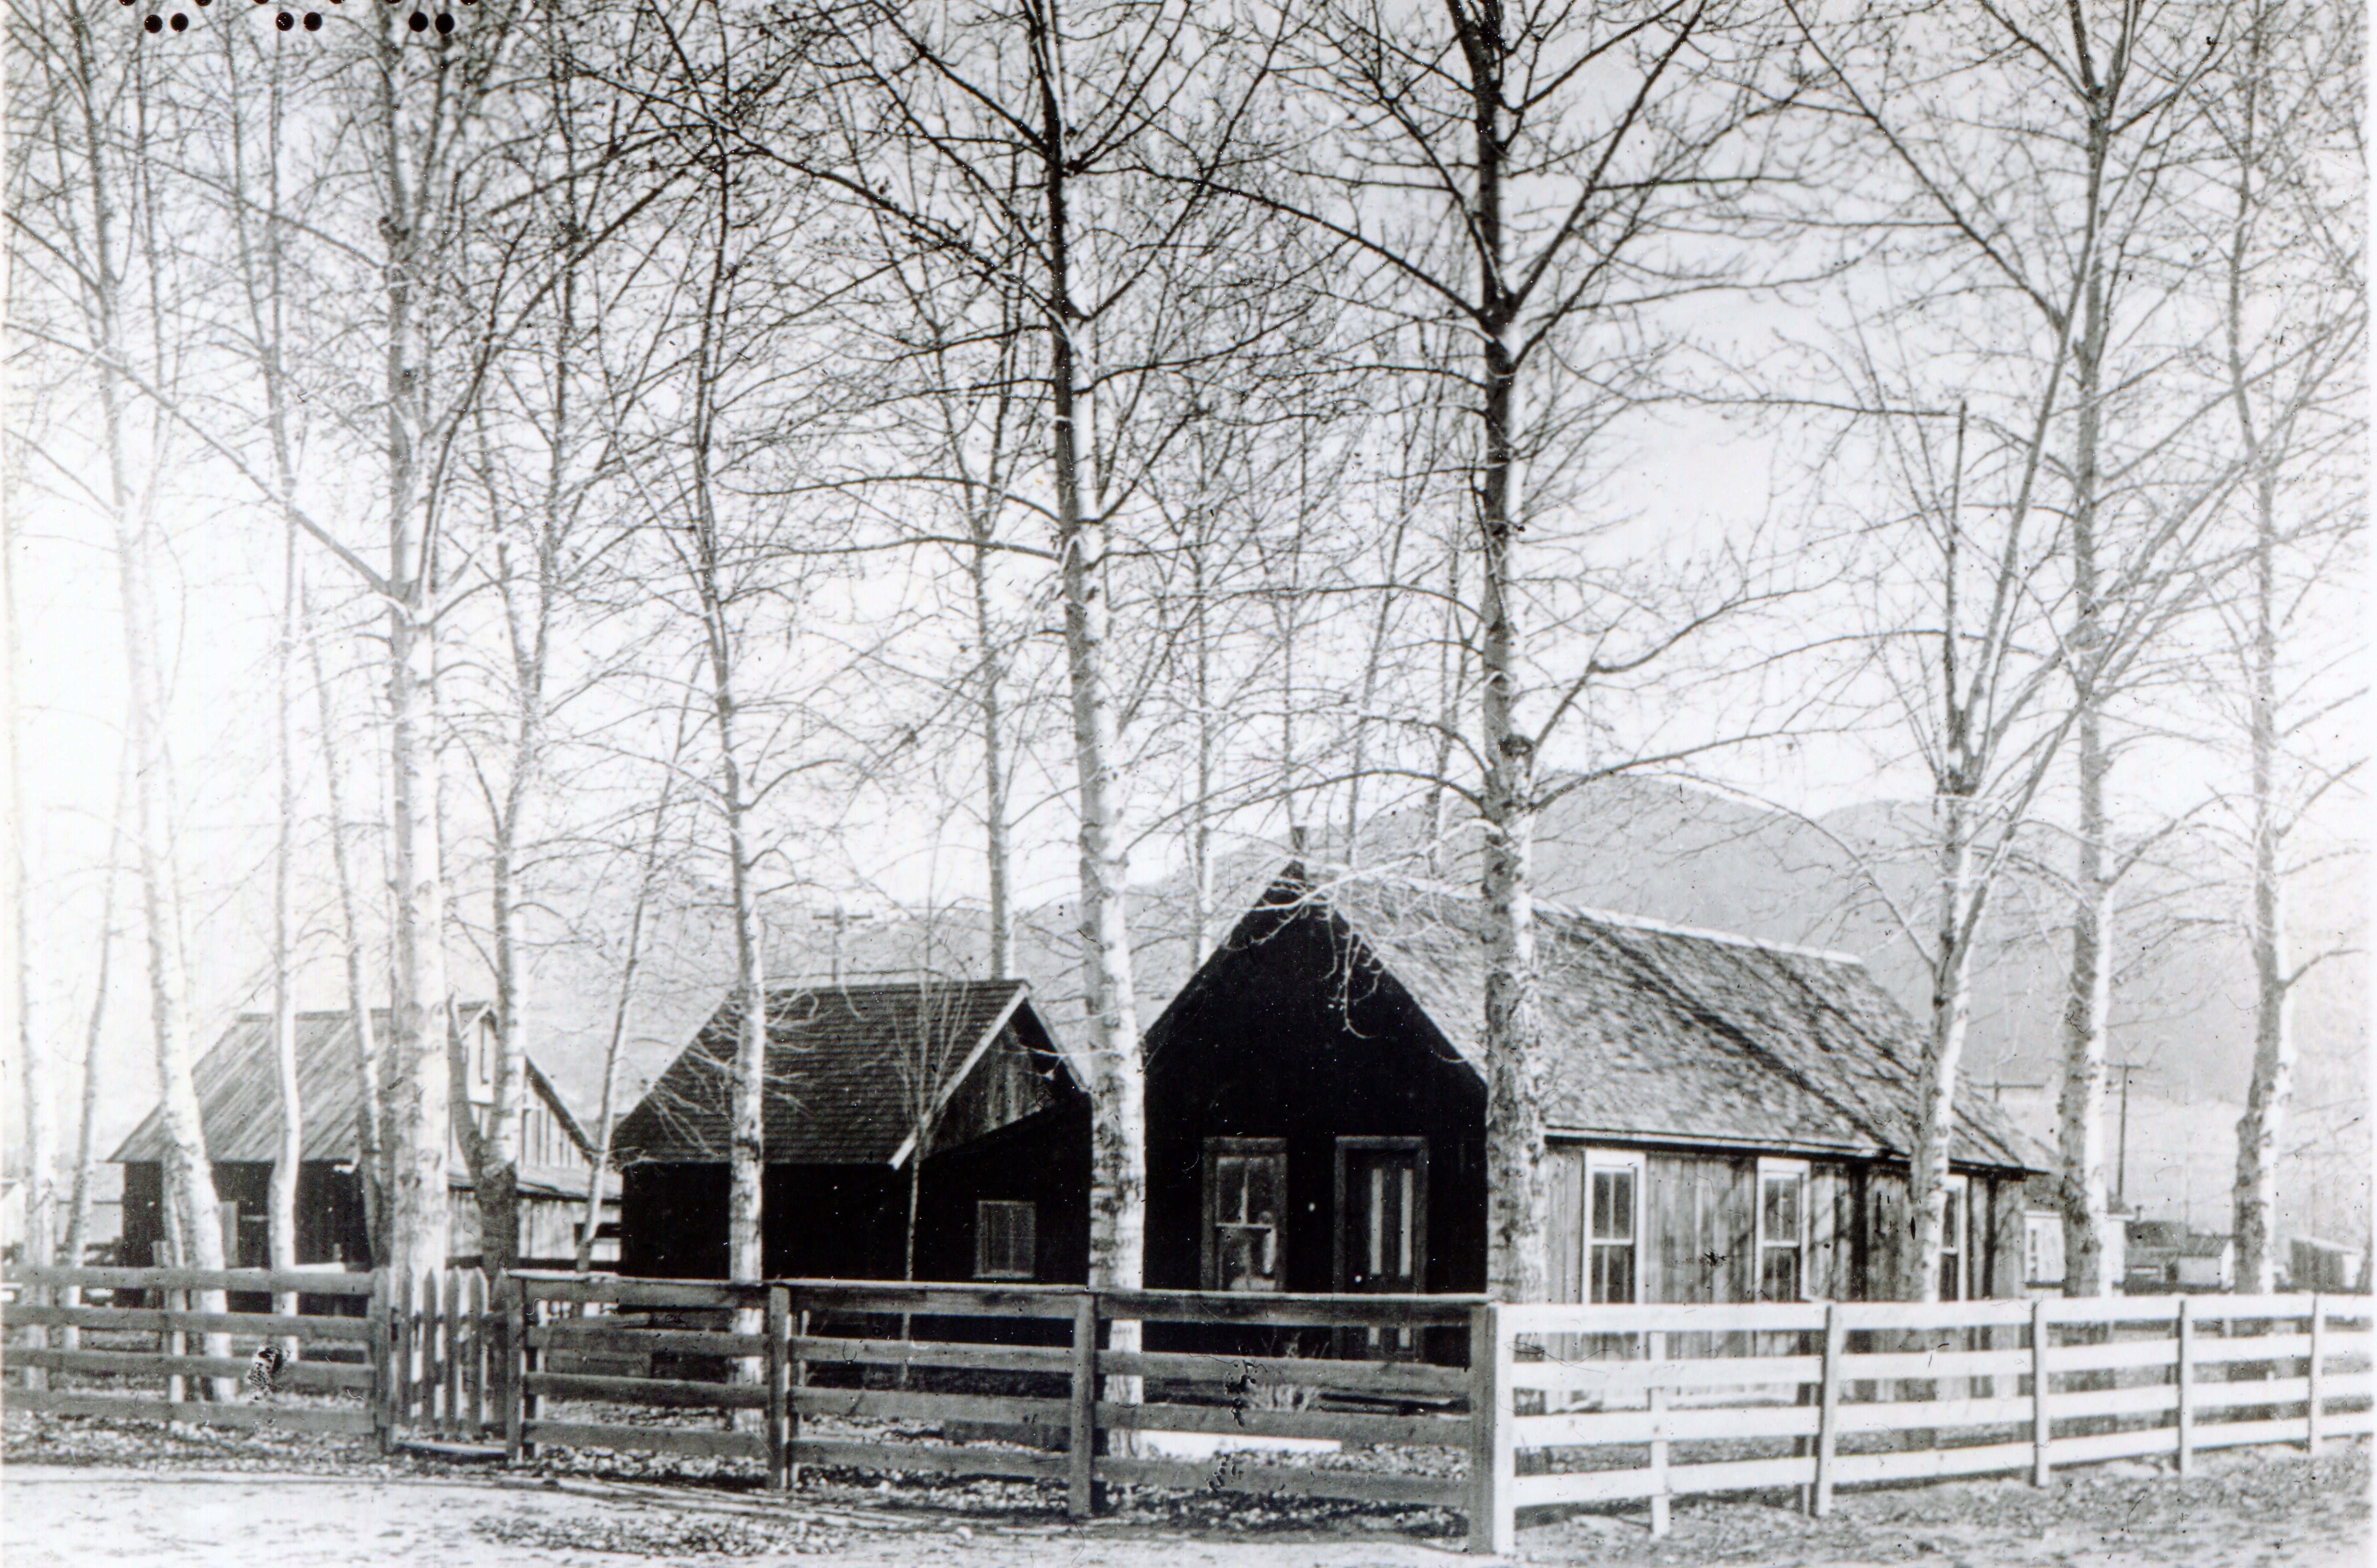 The Victor, Montana labs were built of wood in a small grove of trees and surrounded by a fence